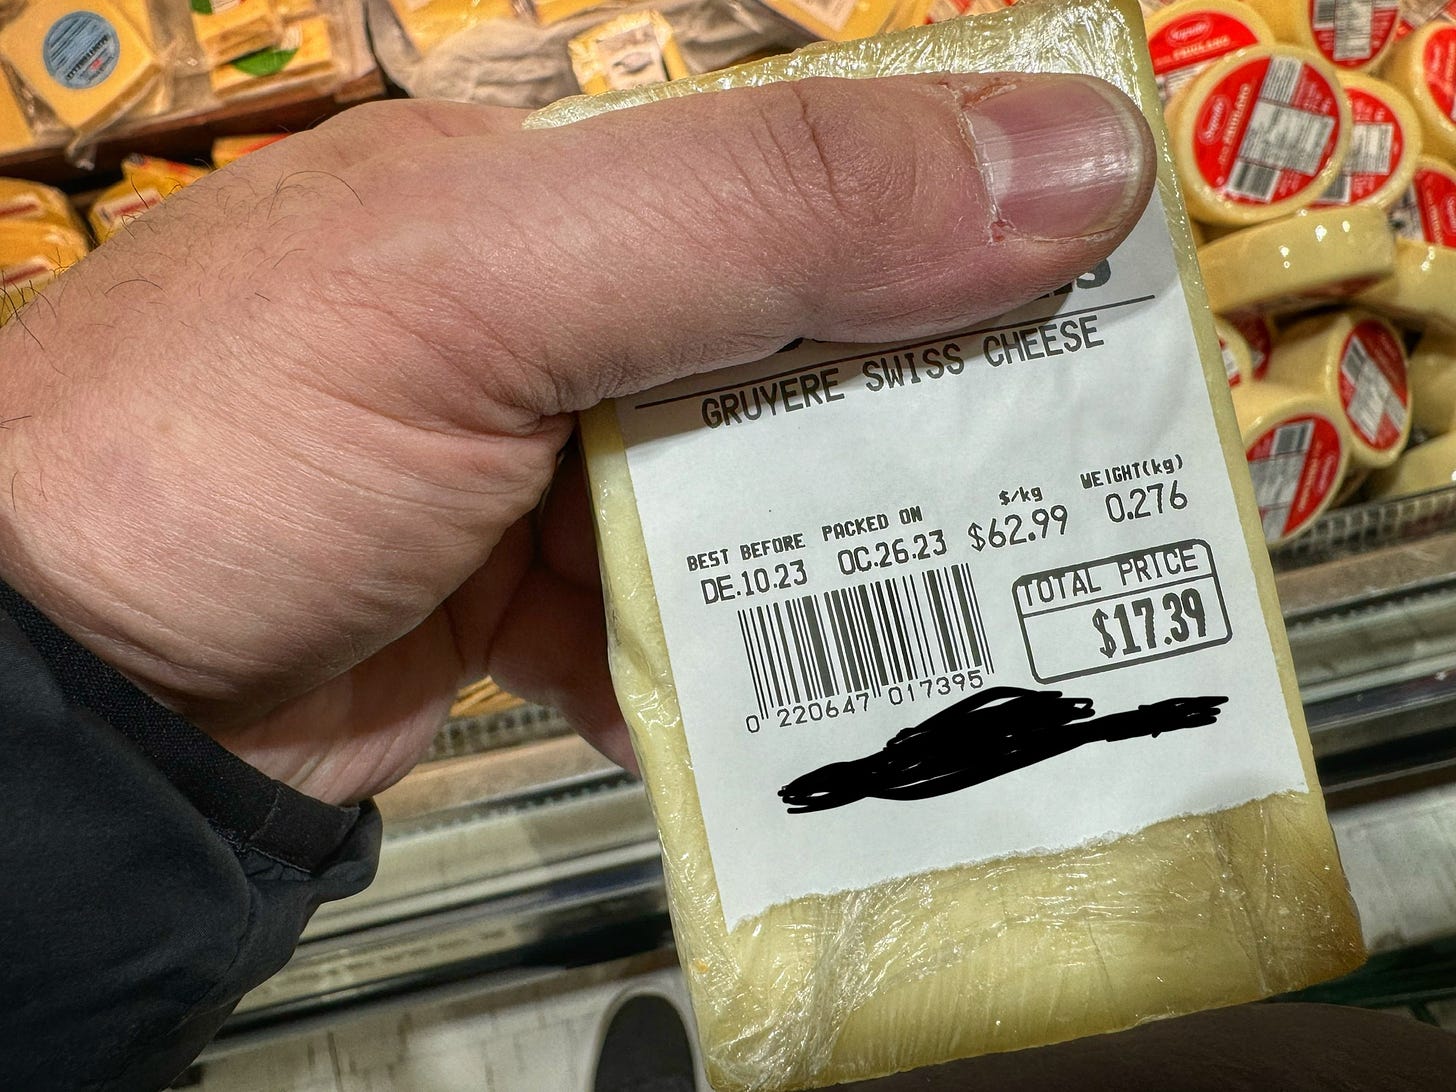 A piece of Gryuere cheese at a supermarket. 0.276 kg costs $17.39. The price per kilogram is $62.99